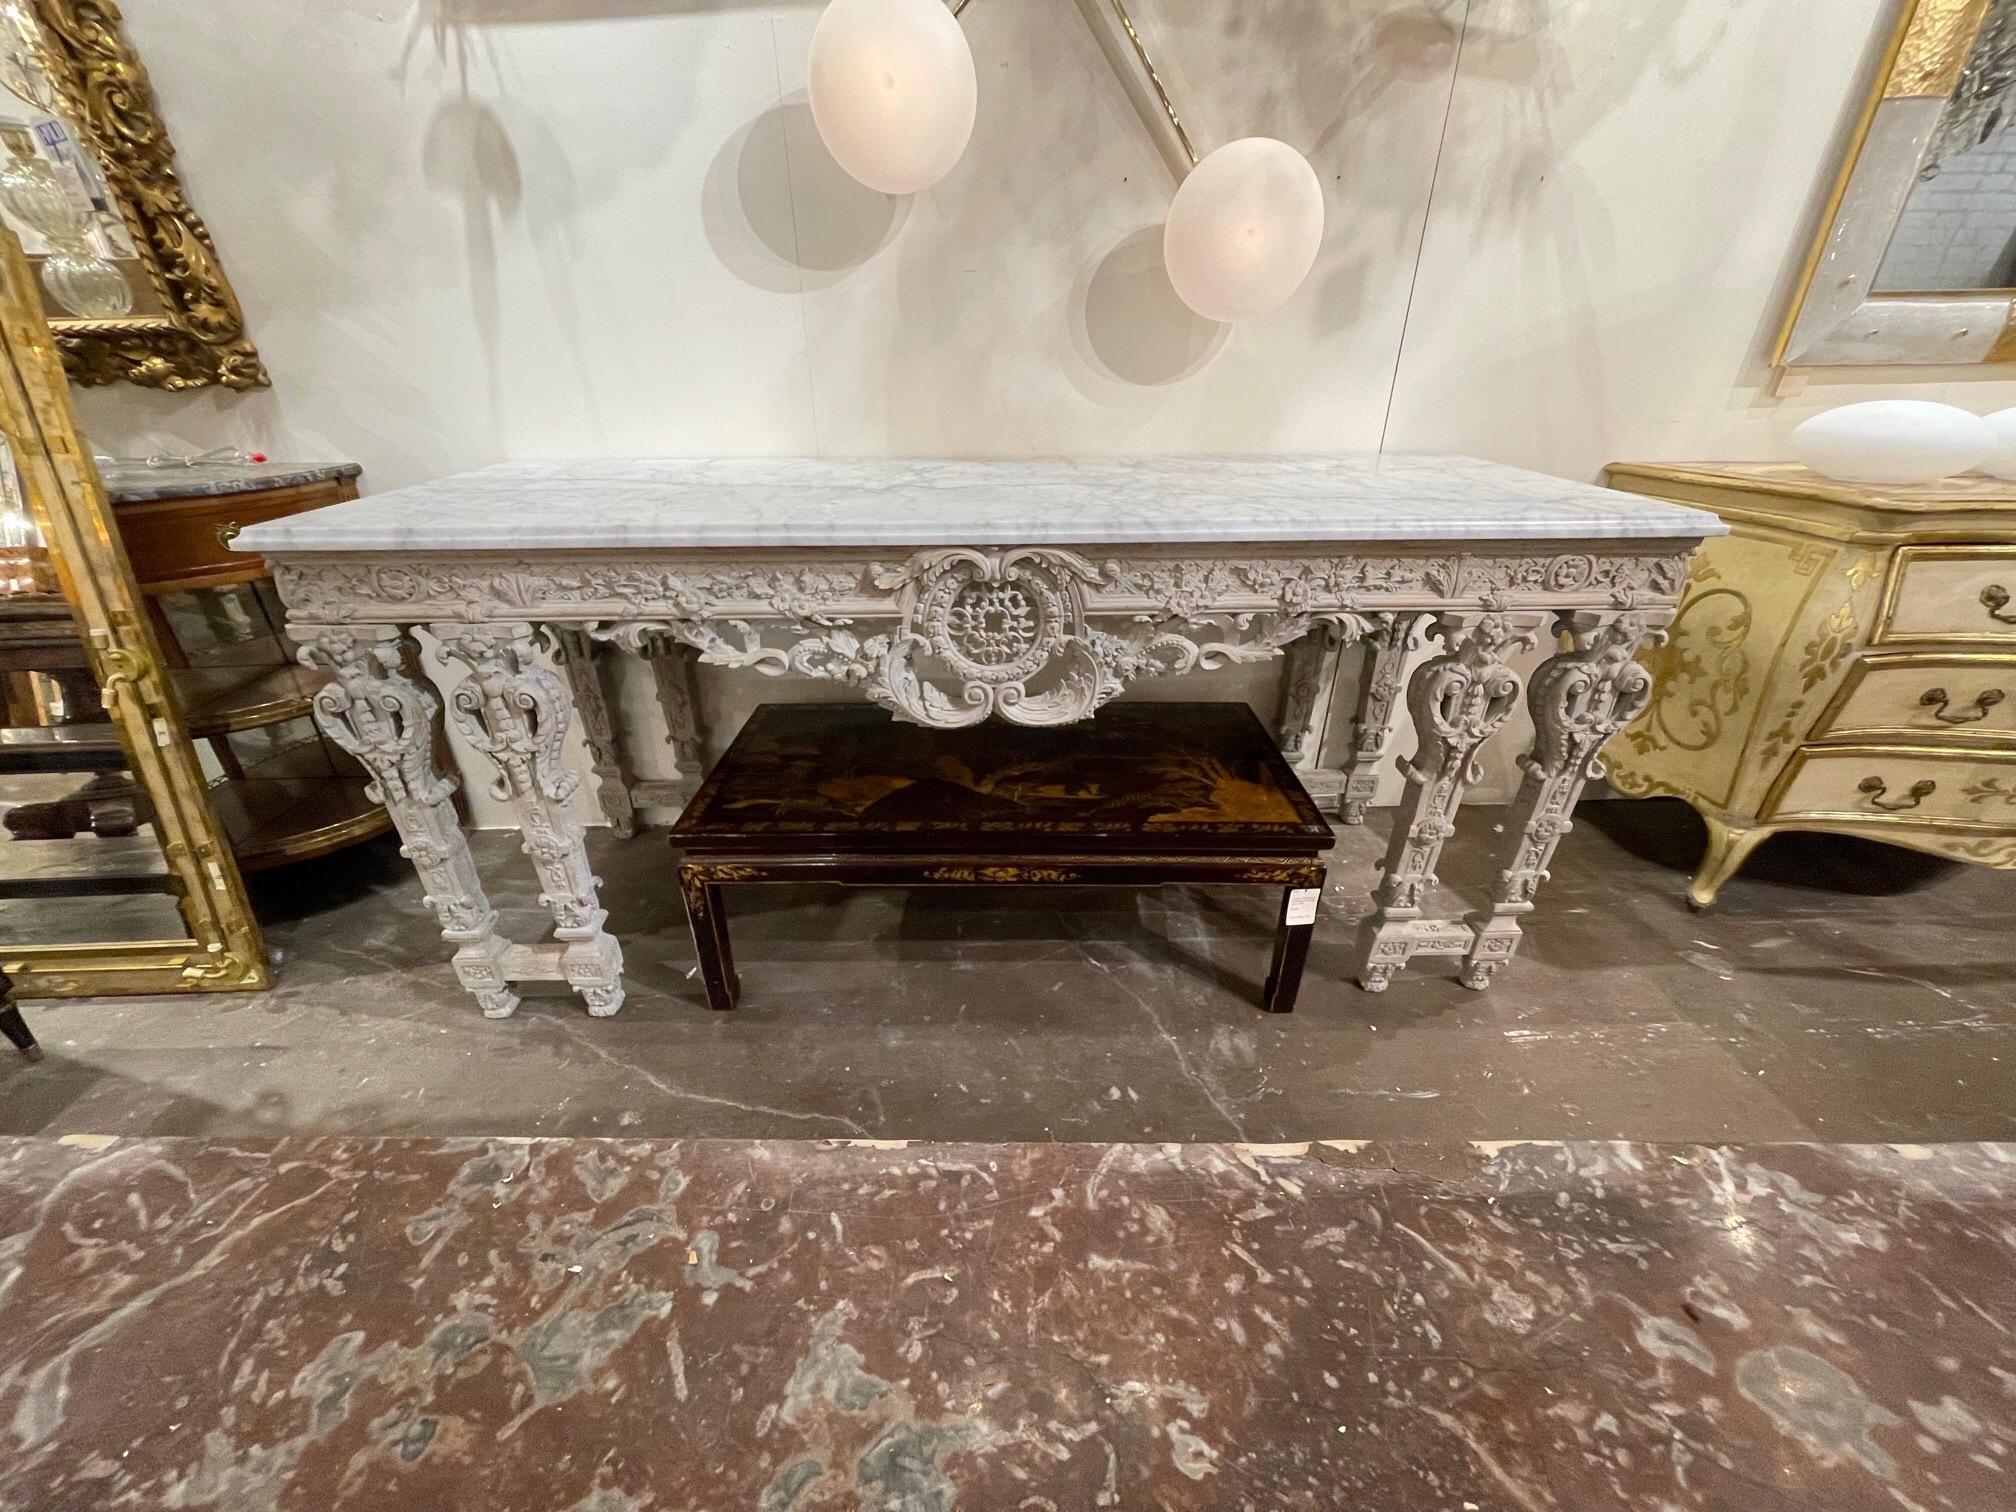 Exceptional 19th century English neo-classical carved and whitewashed Mahogany console. Very fine carvings and a beautiful carrara marble top. A fabulous piece that is sure to impress!!